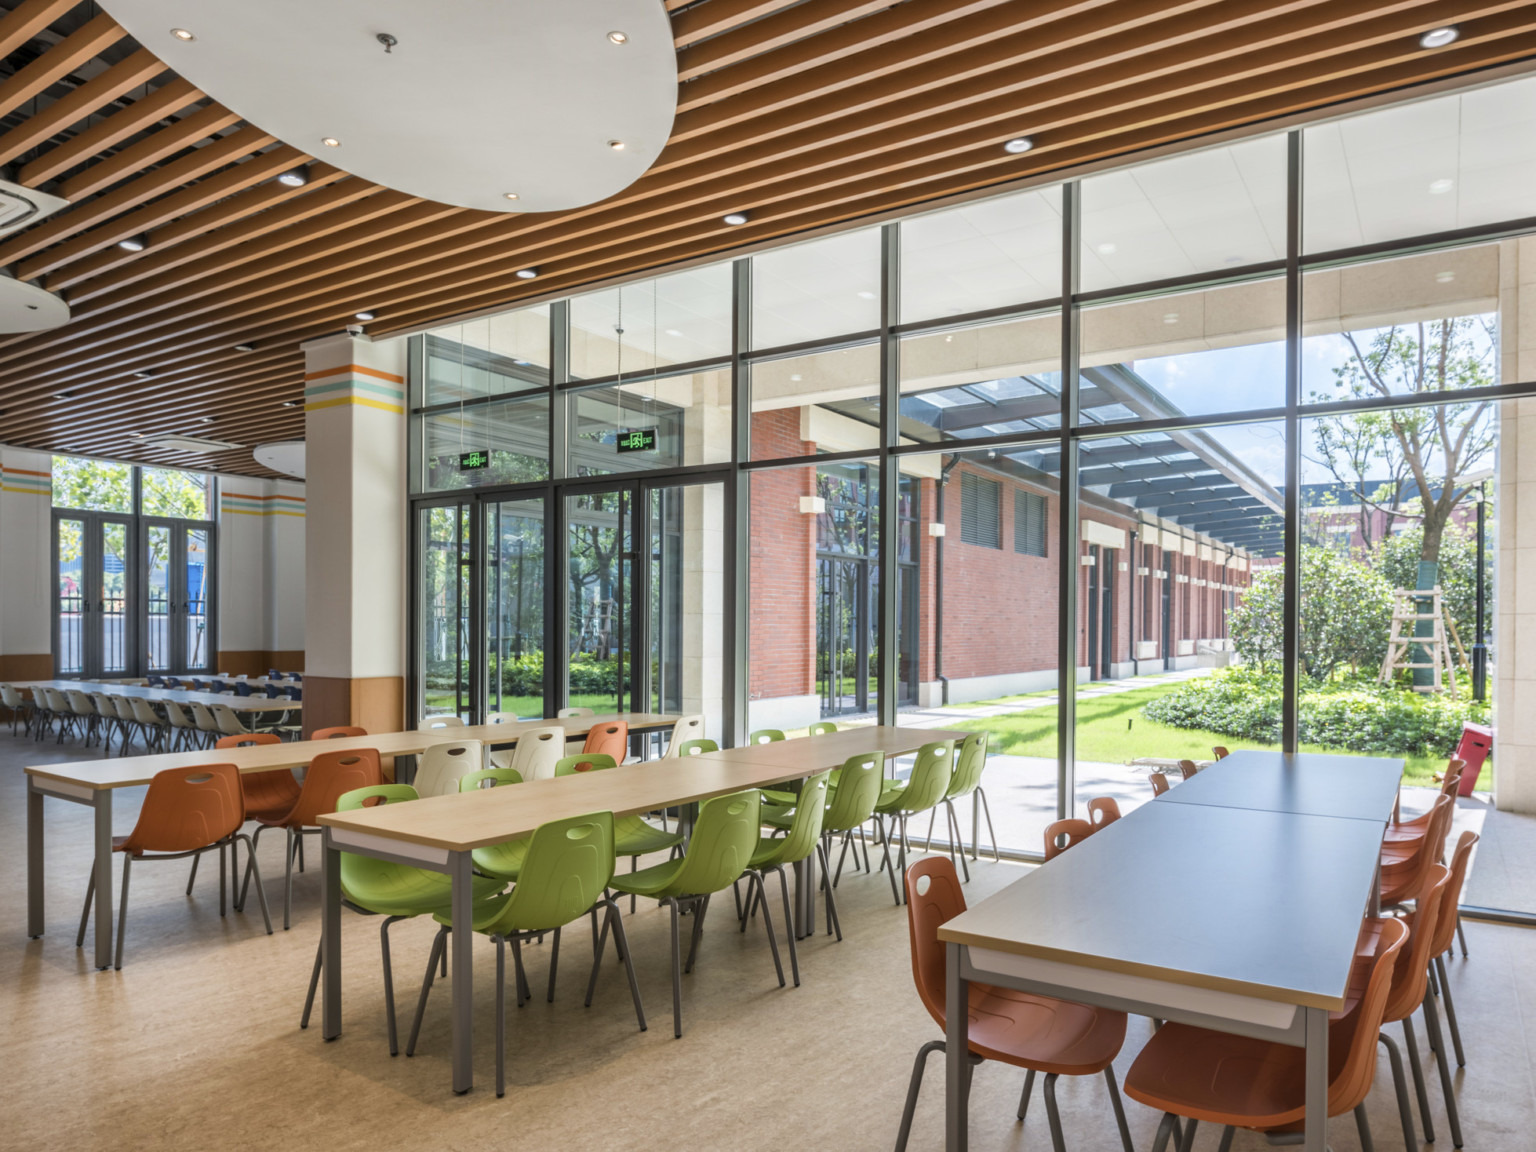 Dining area with long tables and colorful chairs looking out from floor to ceiling windows onto a courtyard with trees